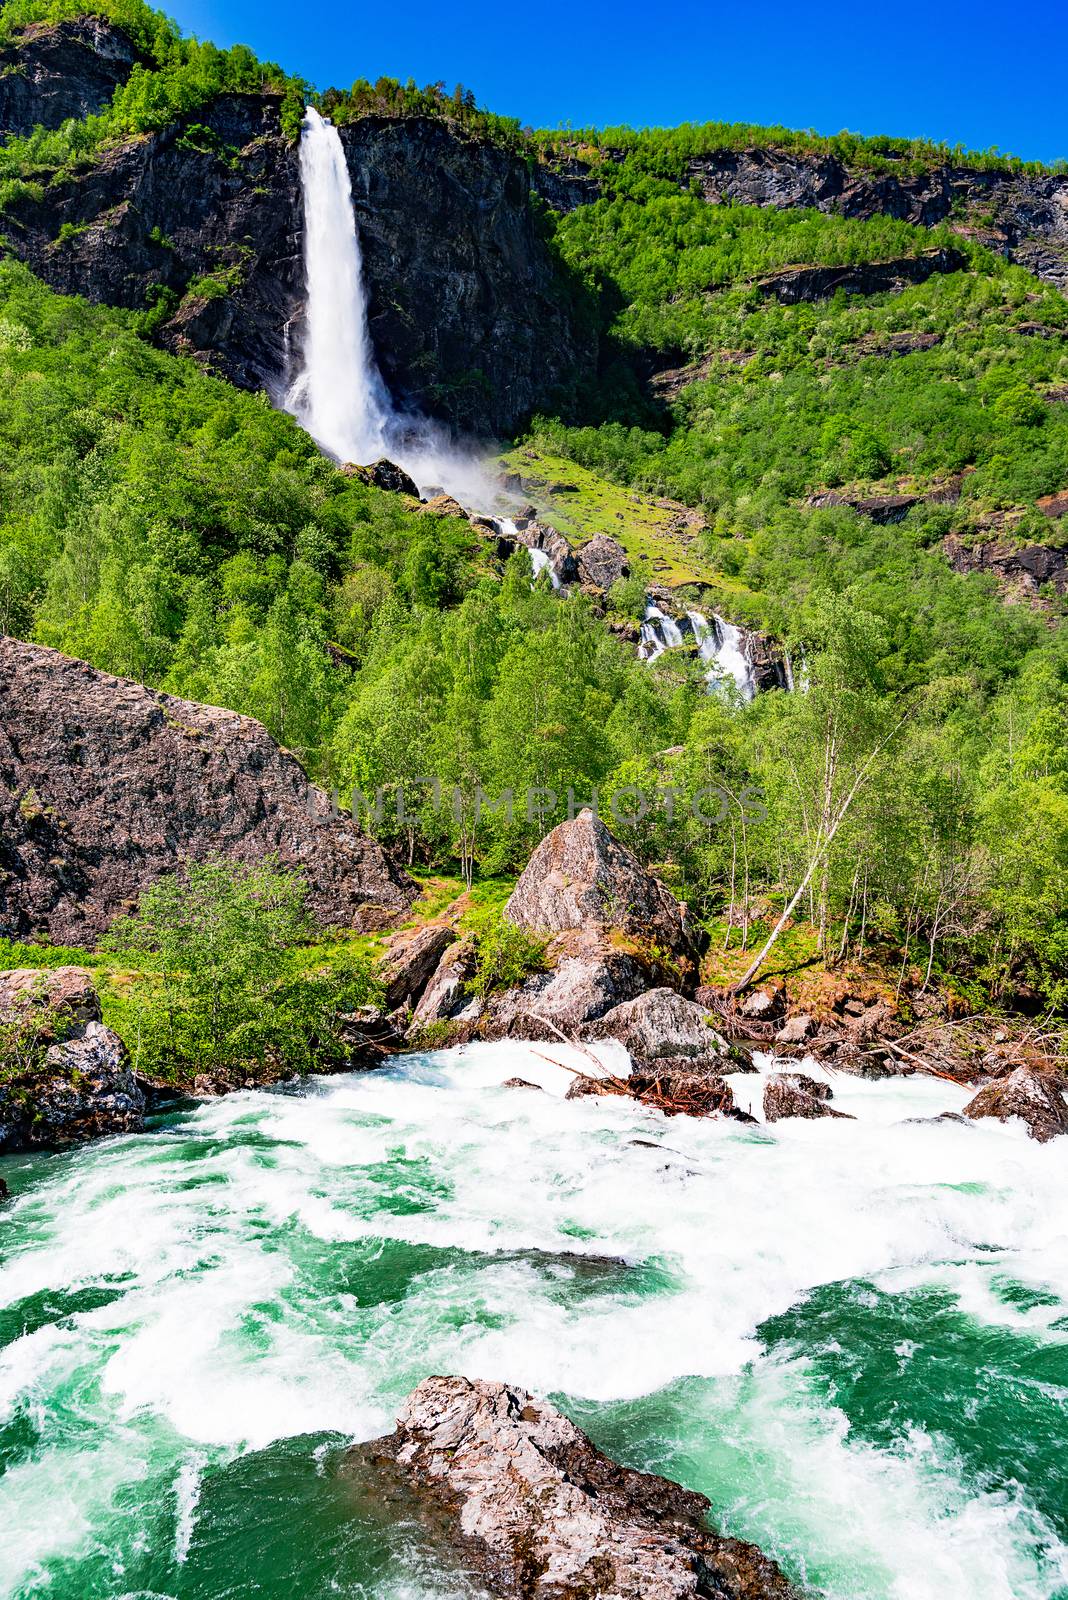 Landscape with waterfall in Norway